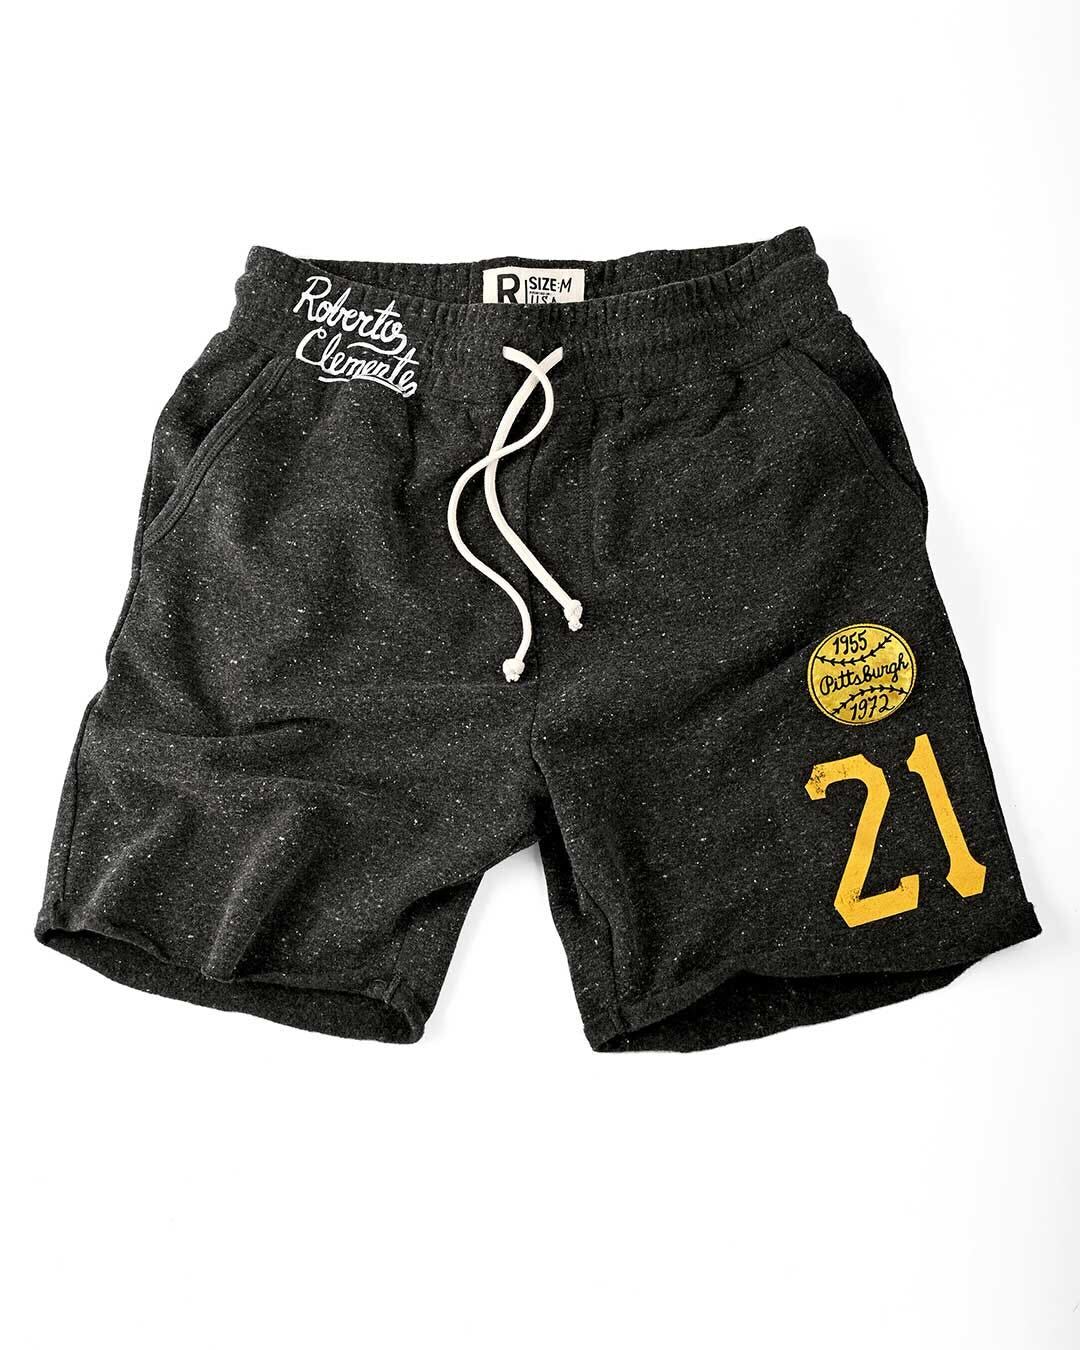 Roberto Clemente #21 Black Shorts - Roots of Fight Canada